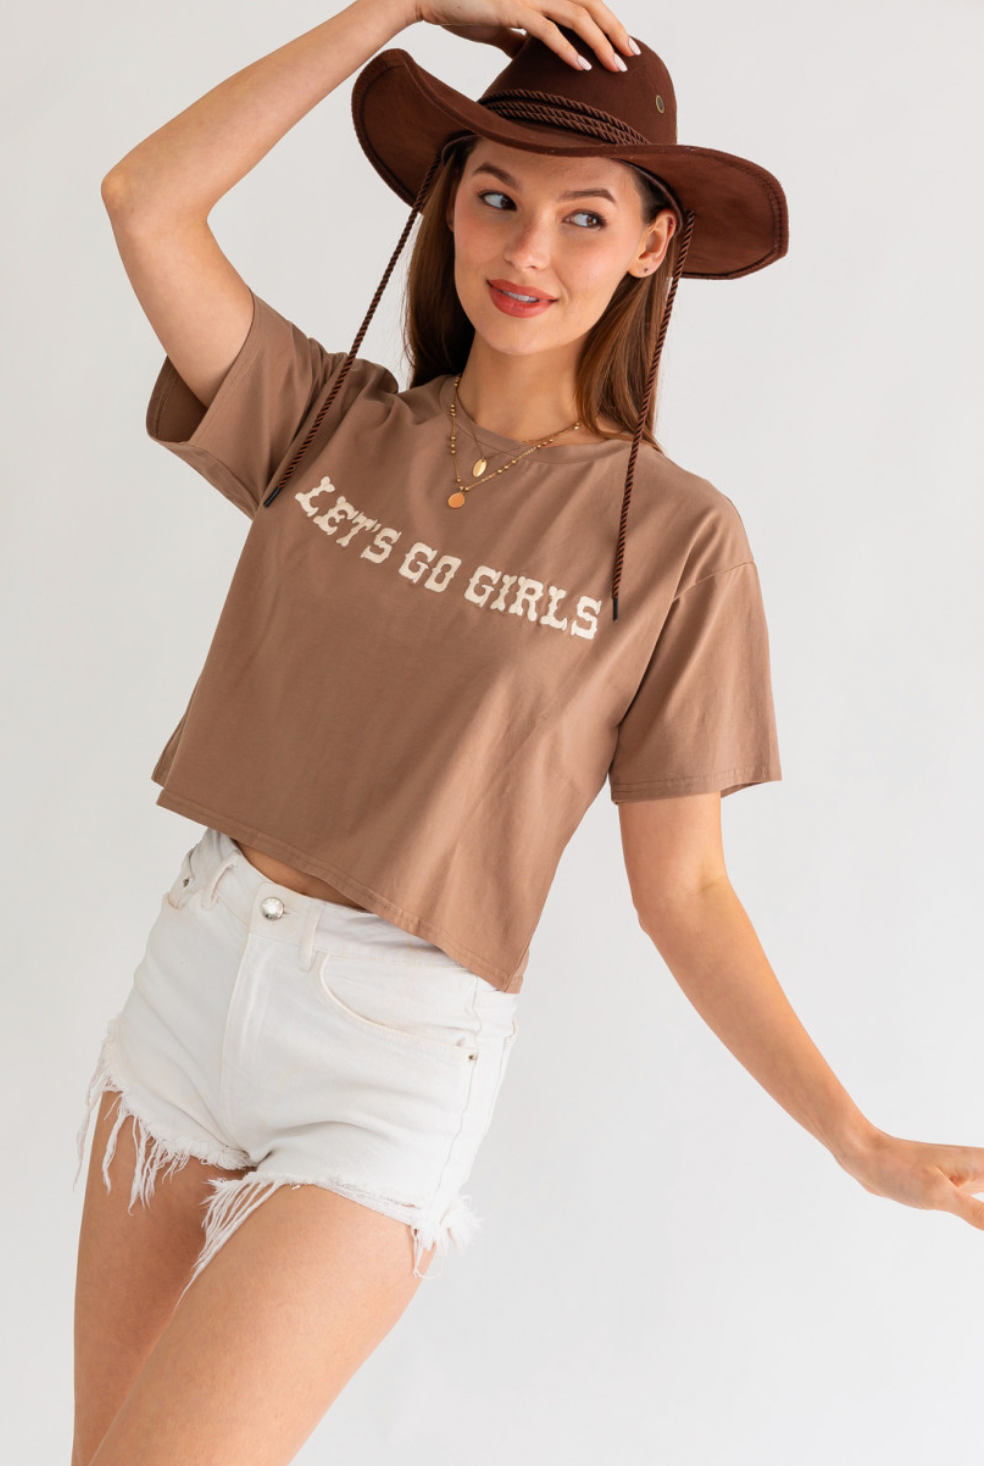 Lets Go Girls Embroidered Tee